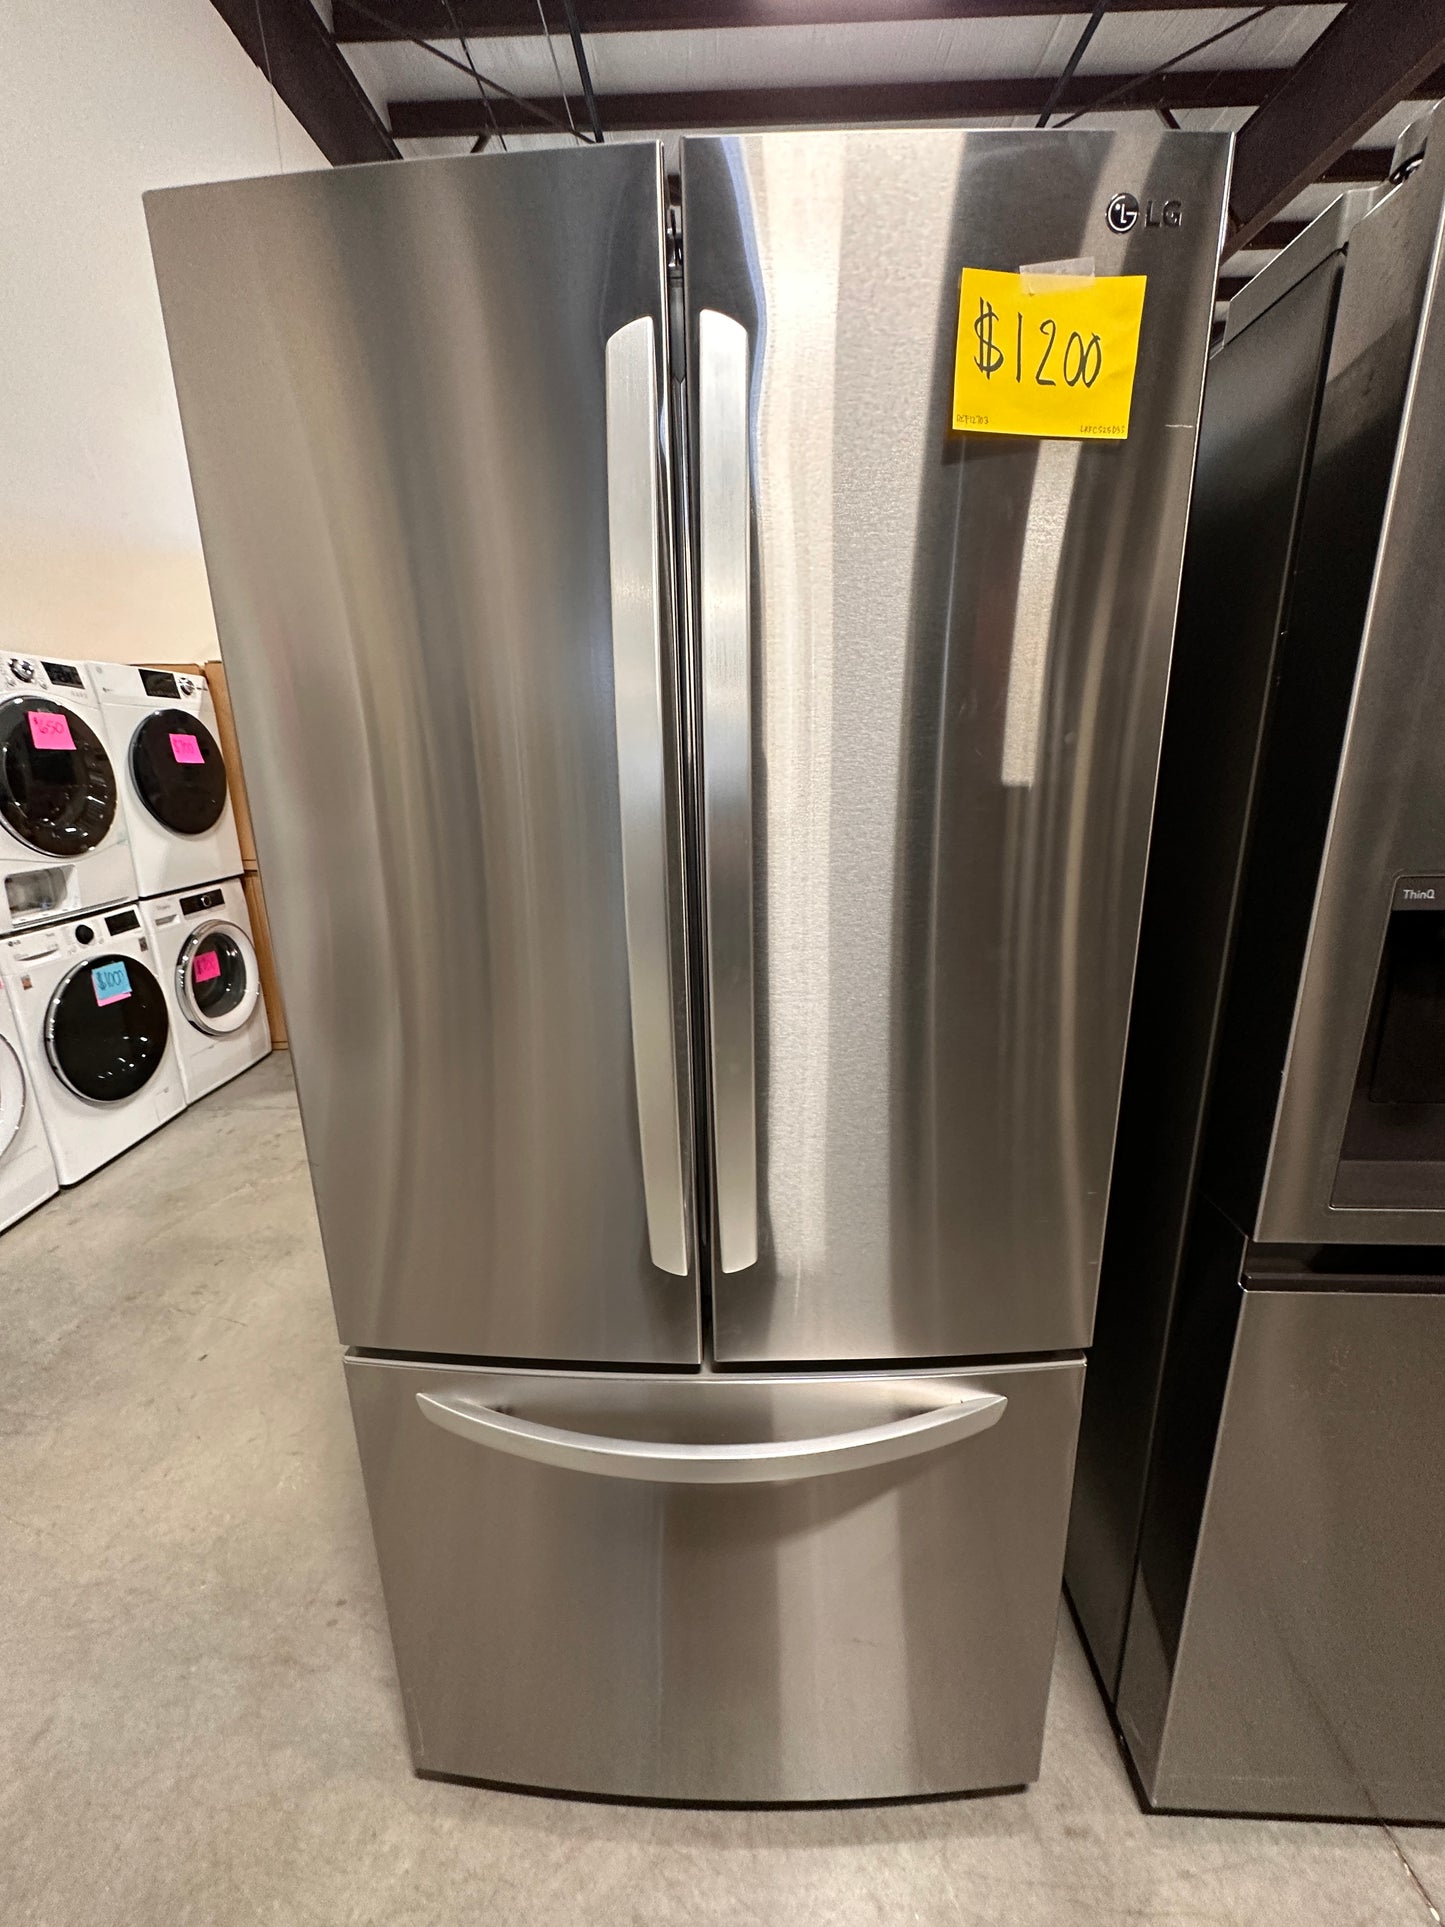 LG - 25.1 Cu. Ft. French Door Refrigerator with Ice Maker - Stainless steel  Model:LRFCS25D3S  REF12703